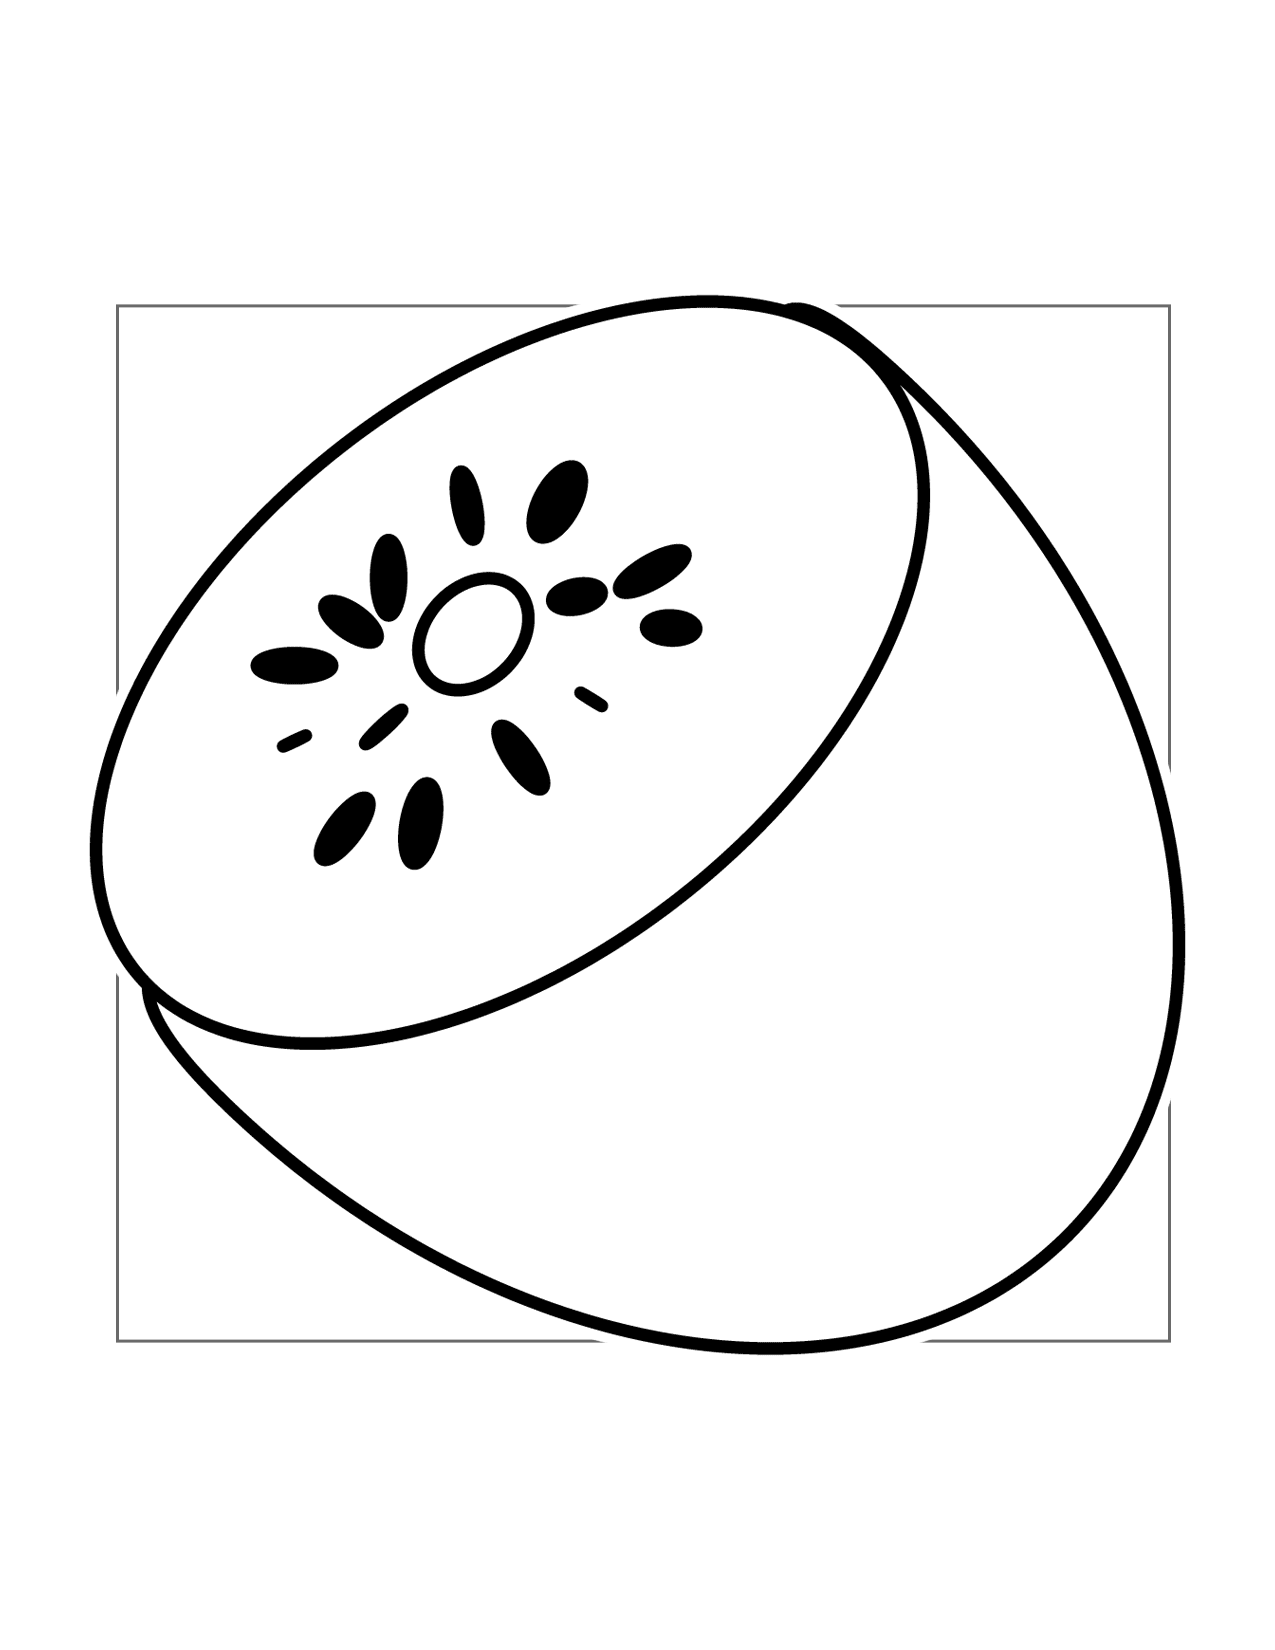 Simple Kiwi Coloring Page